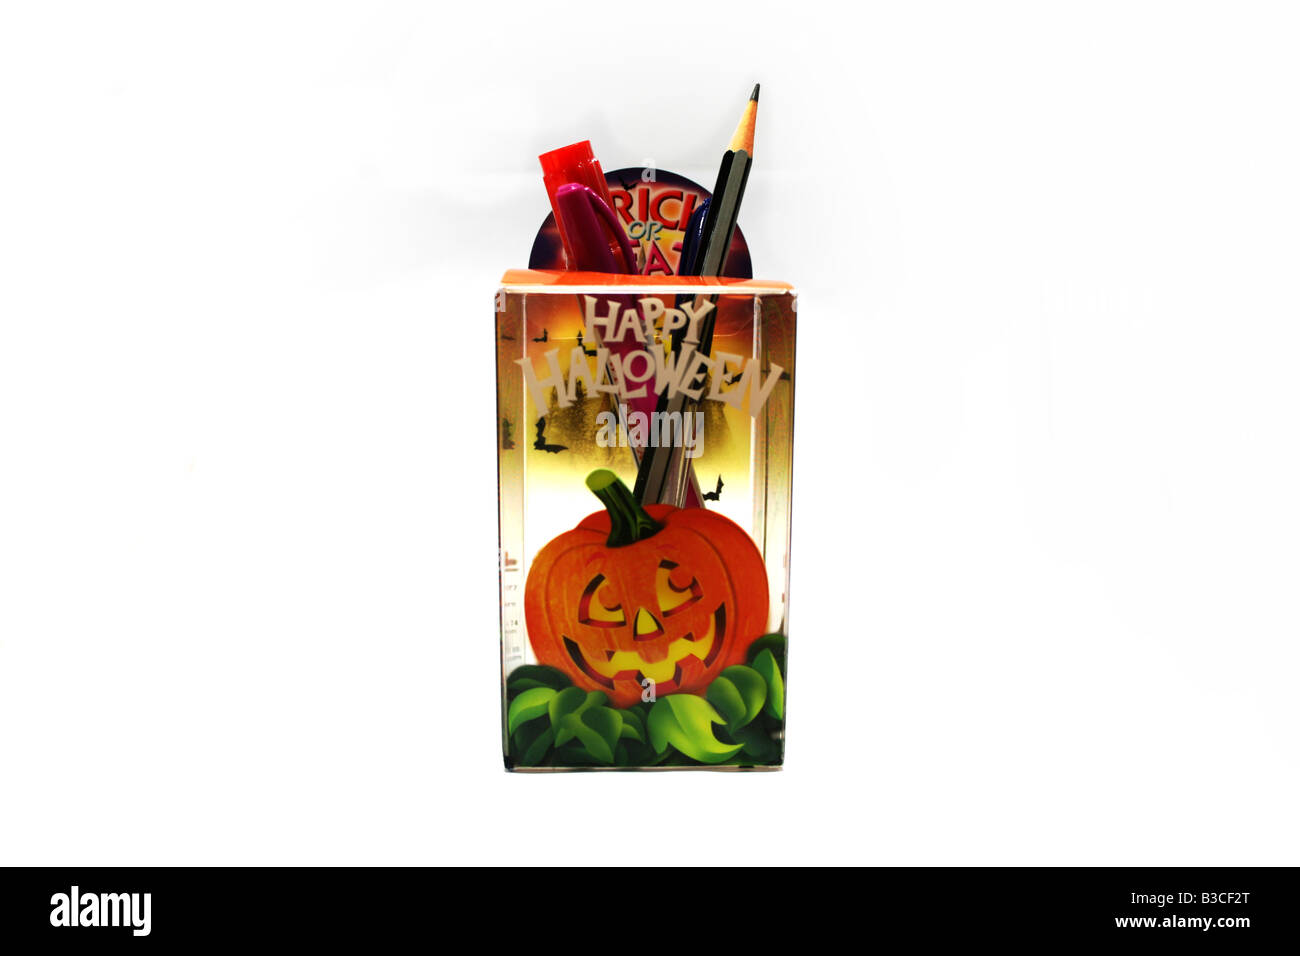 Trick or treat happy halloween stationery holder with picture of a smiling pumpkin for children & adults at home or office use Stock Photo